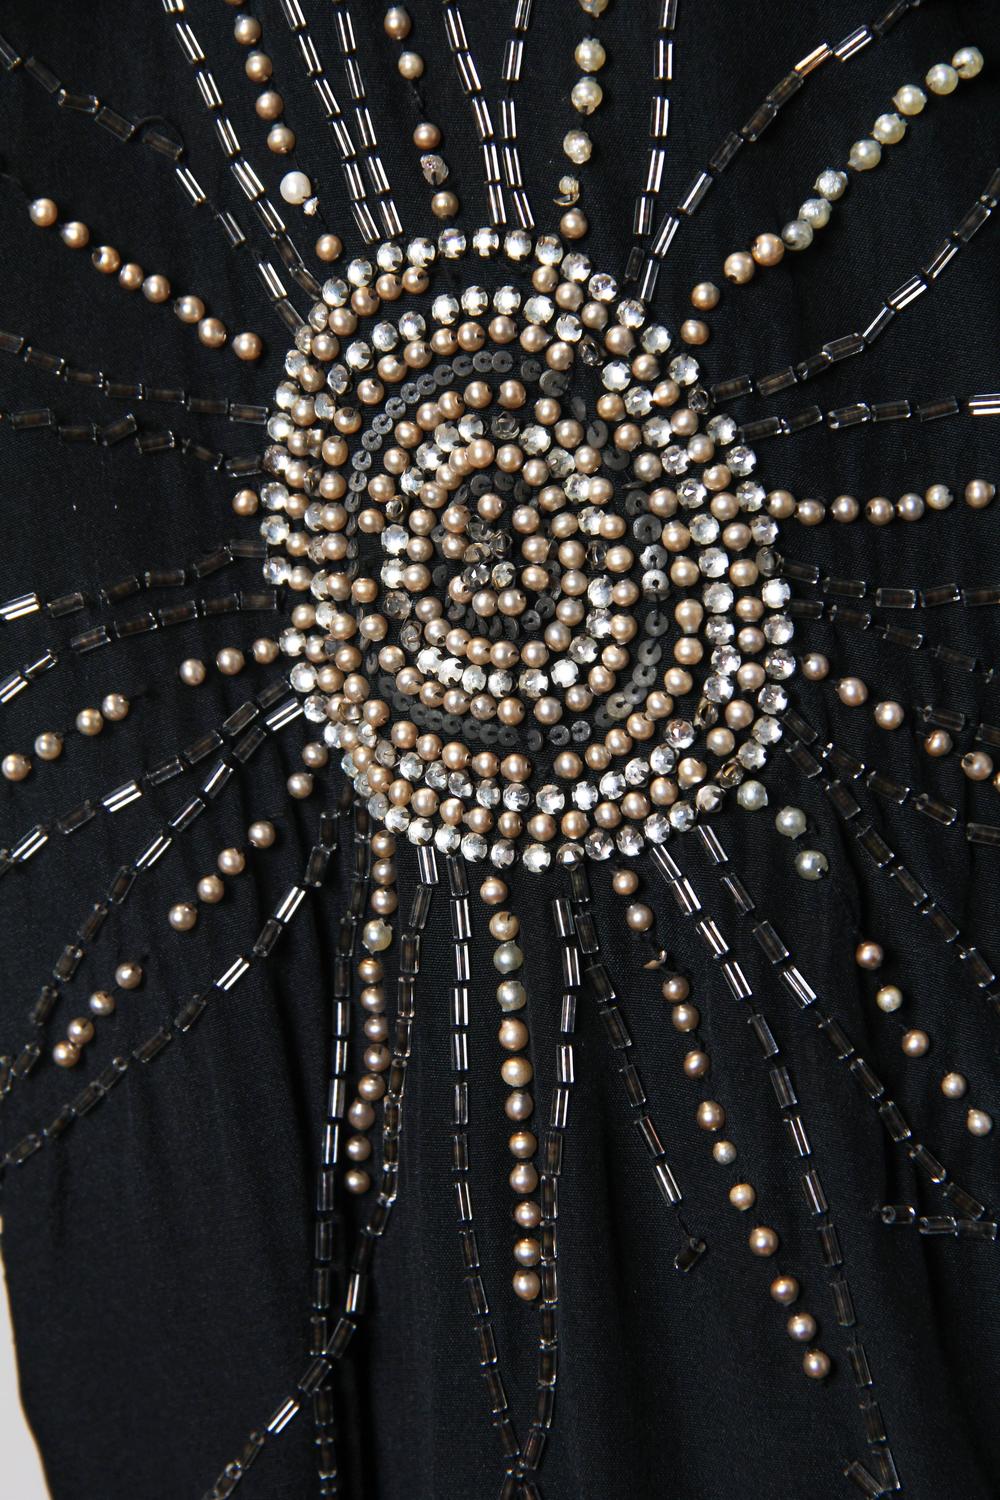 Art Deco Starbursts in Pearls and Crystals For Sale at 1stdibs